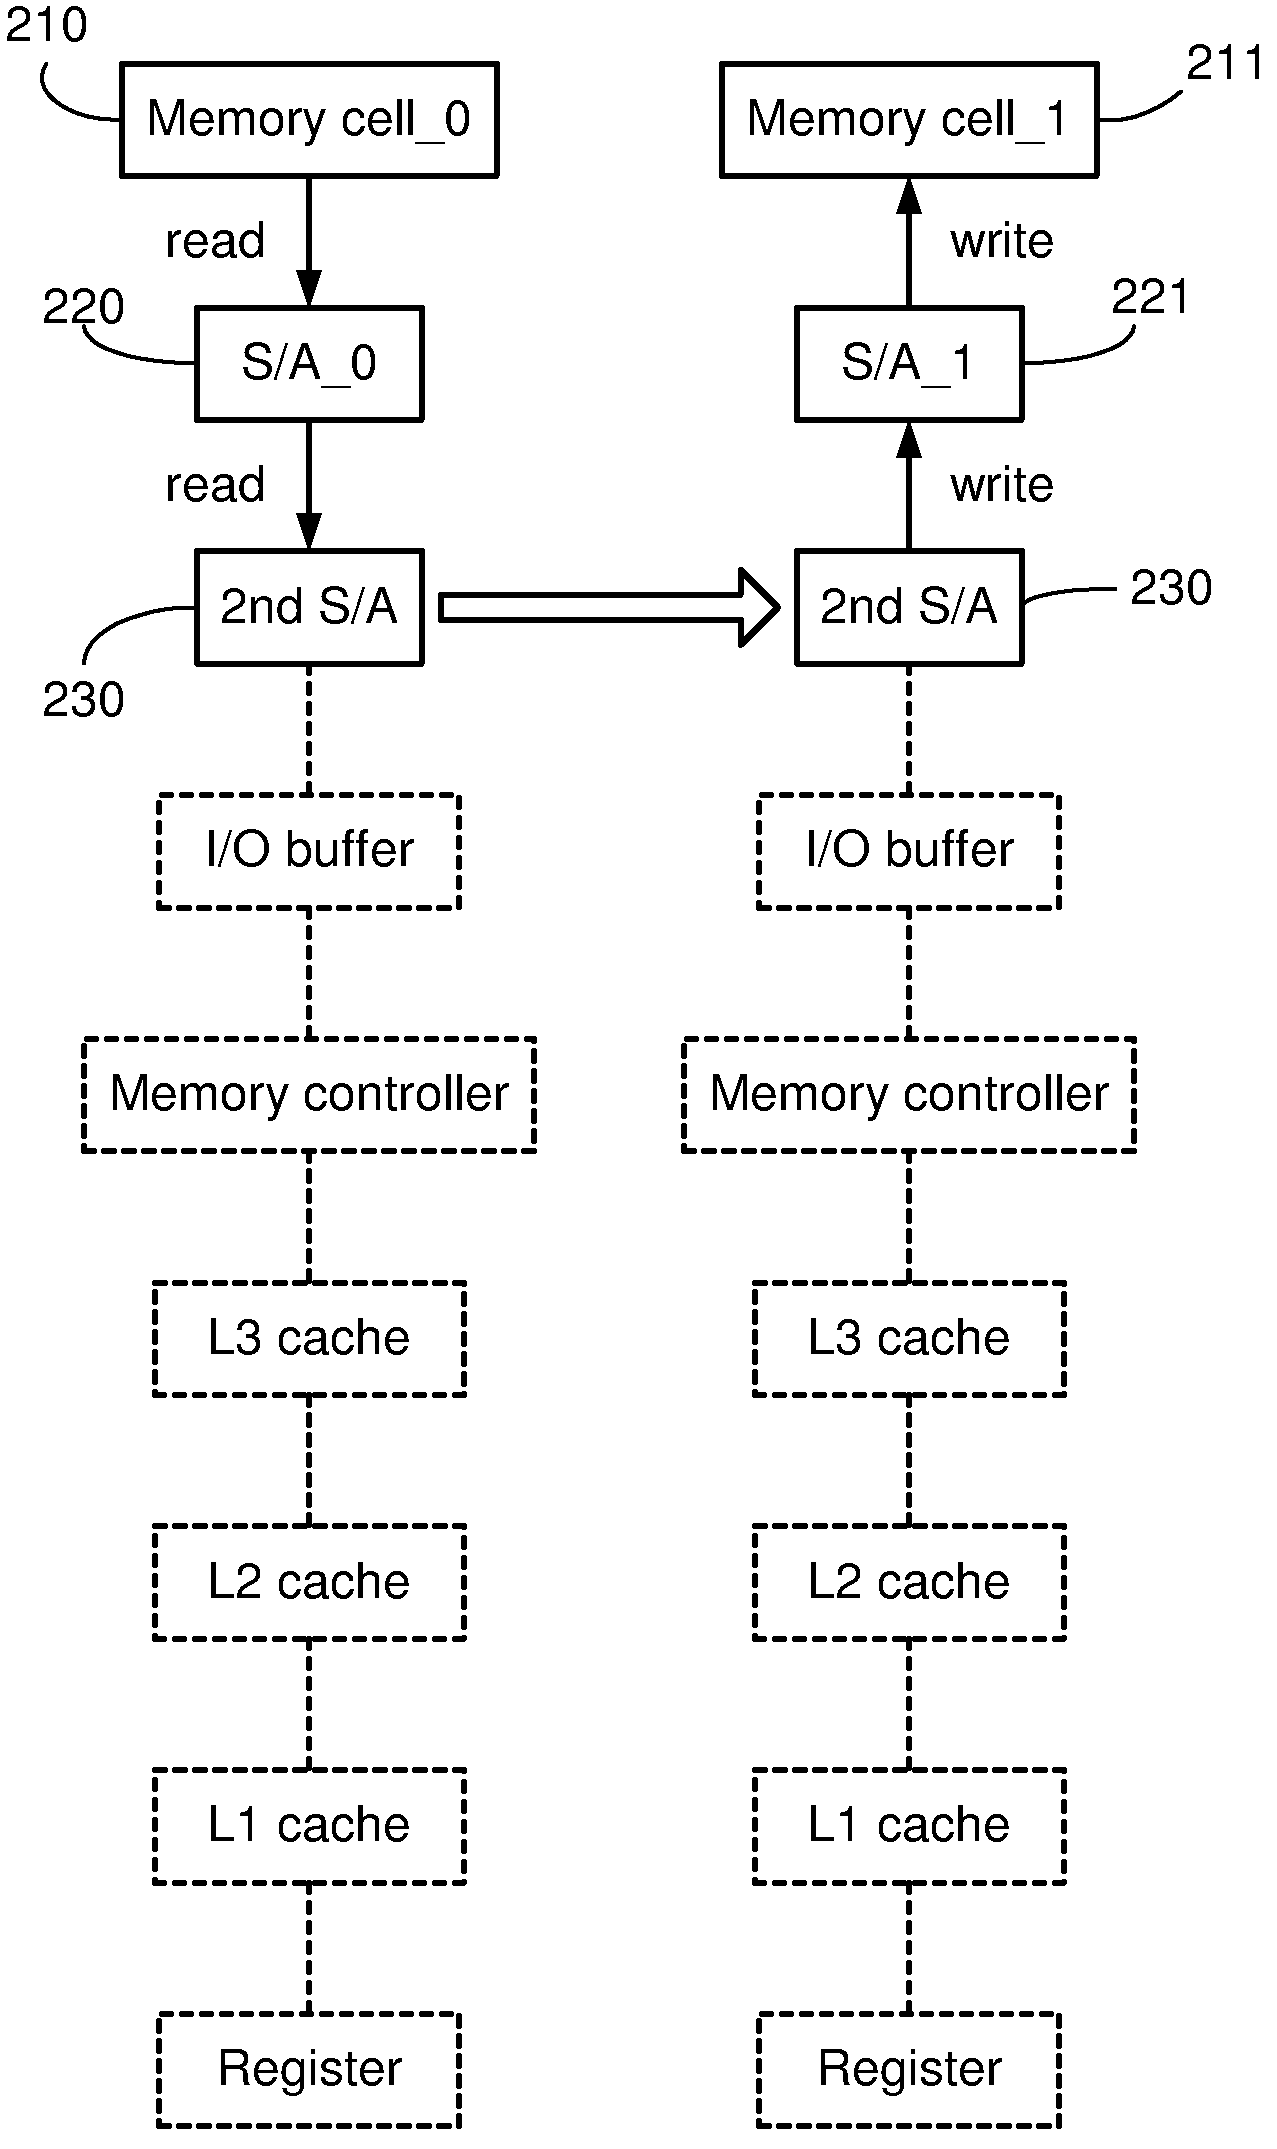 Systems and methods for data transfers between memory cells